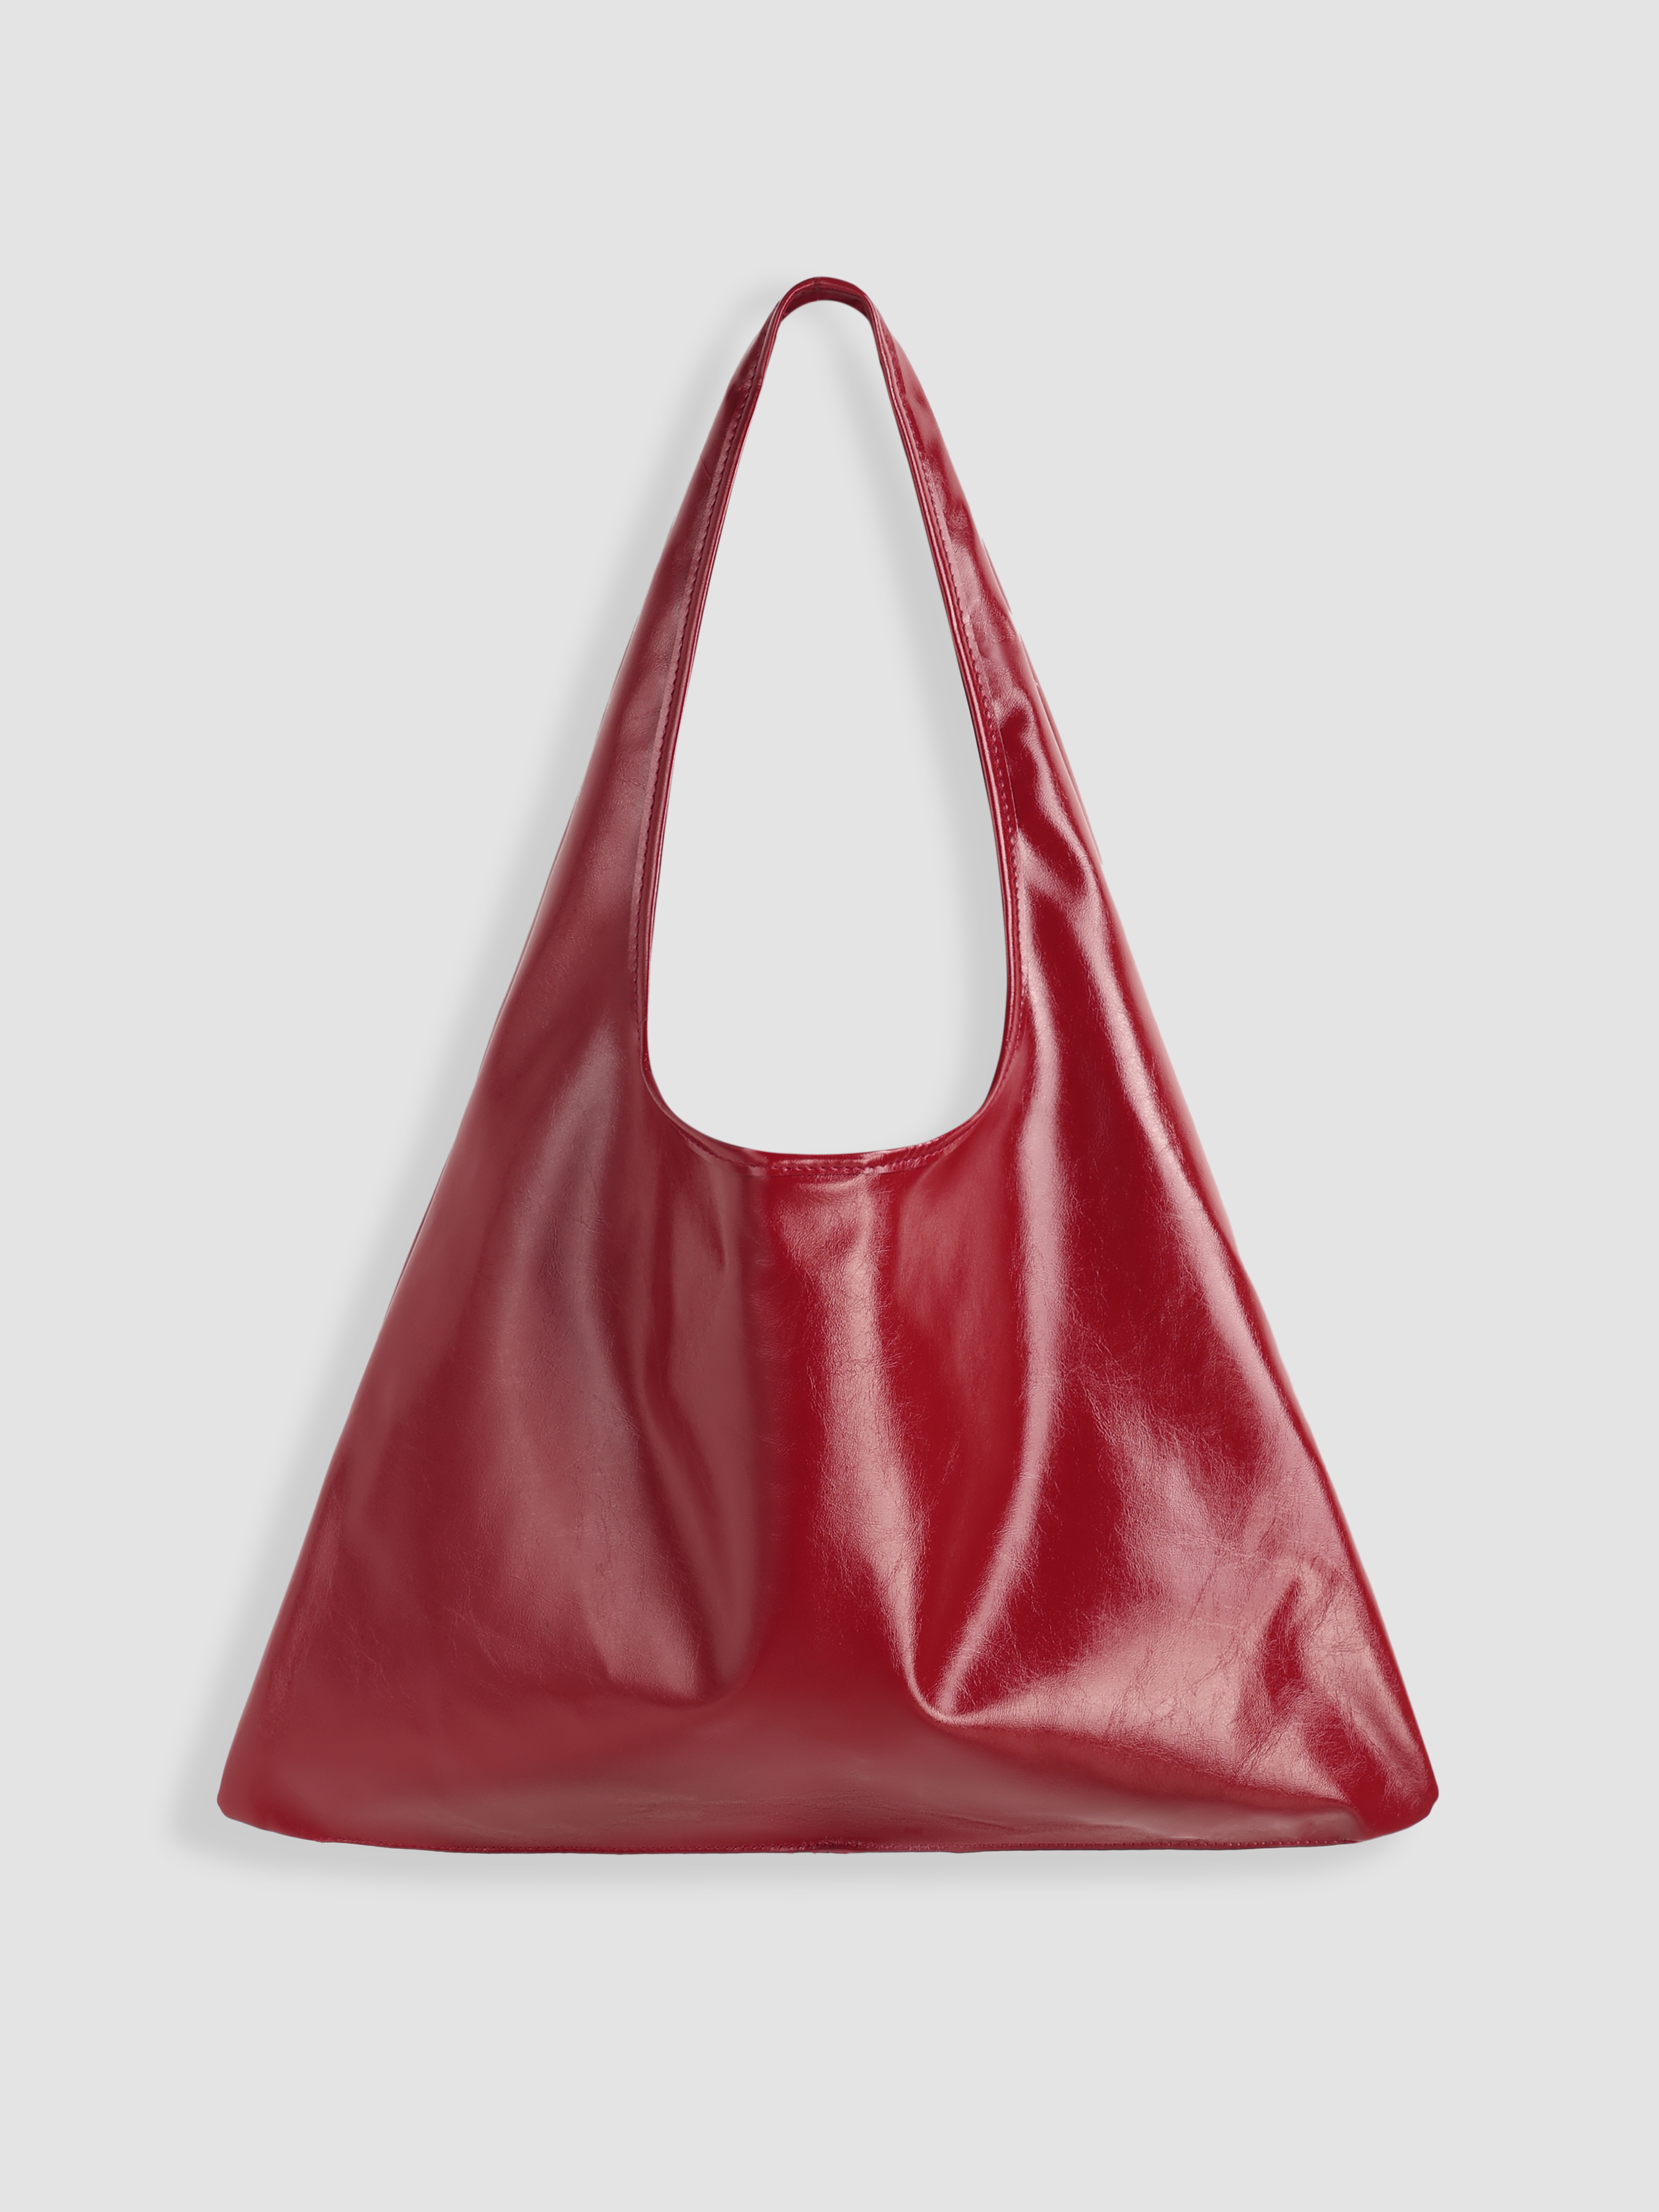 Solid Faux Leather Large Capacity Tote Shopper Bag